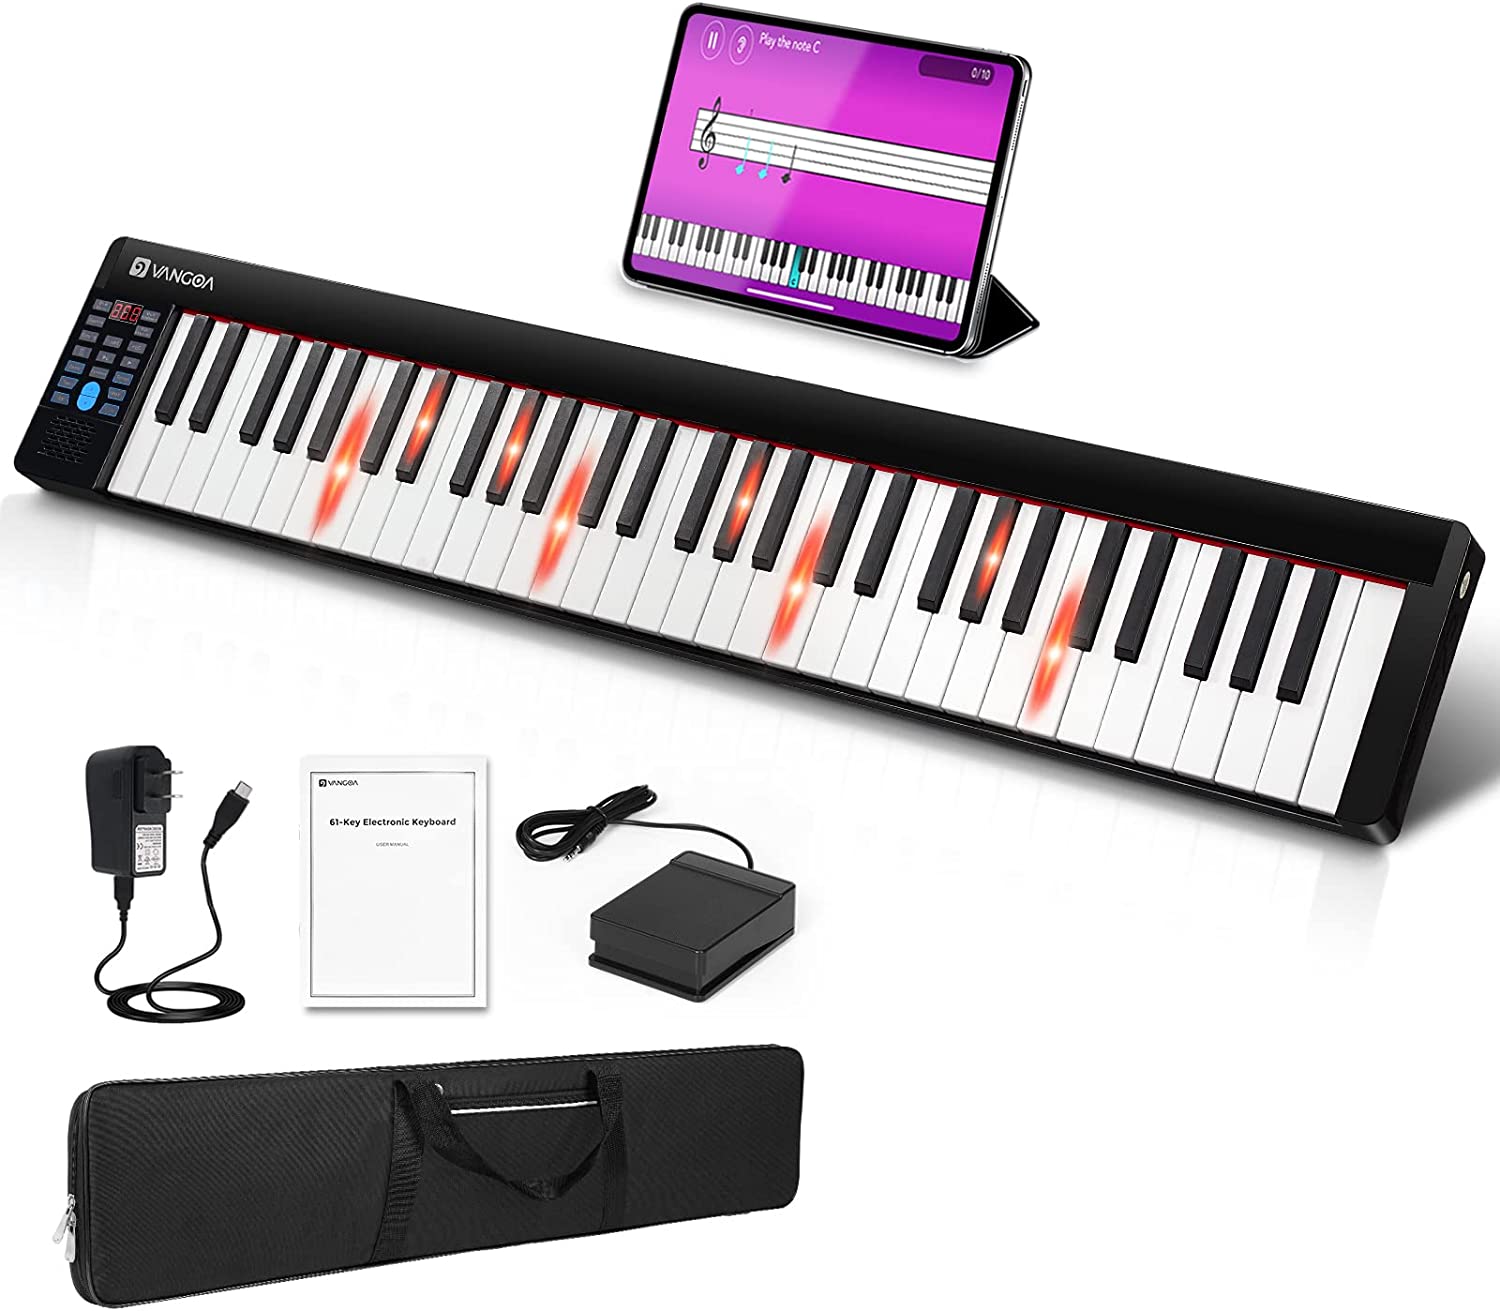 Armstrong verticaal scheuren 🇺🇸]Vangoa VGD610 Portable Piano Keyboard 61 Key with Sustain Pedal Bl